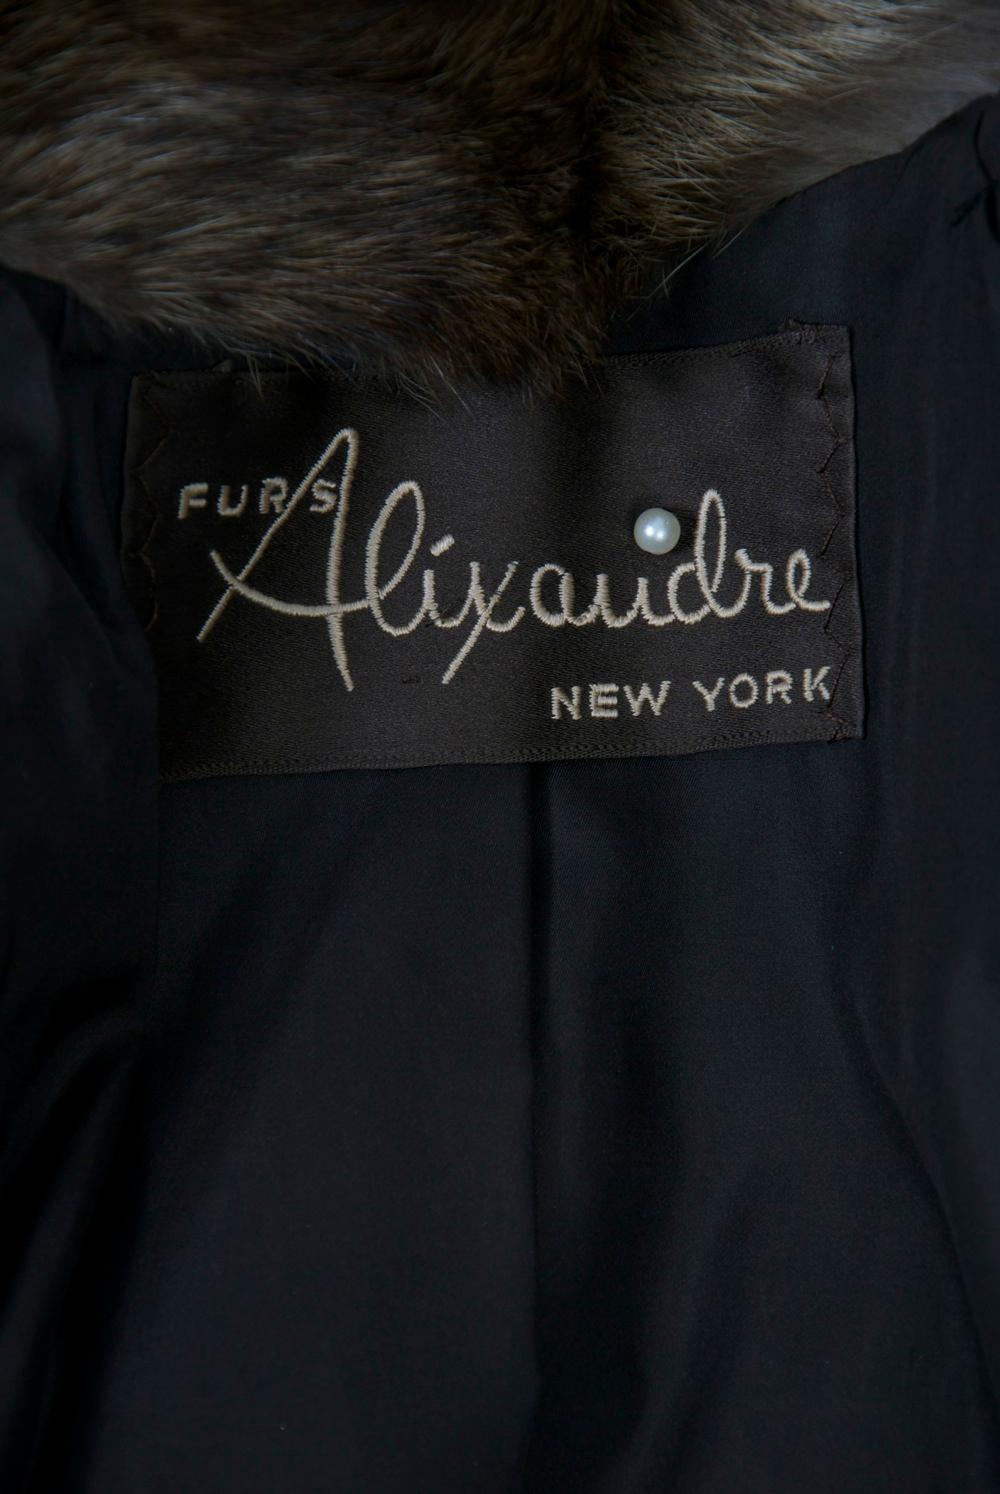 Fisher Fur Coat by Alixandre For Sale 3